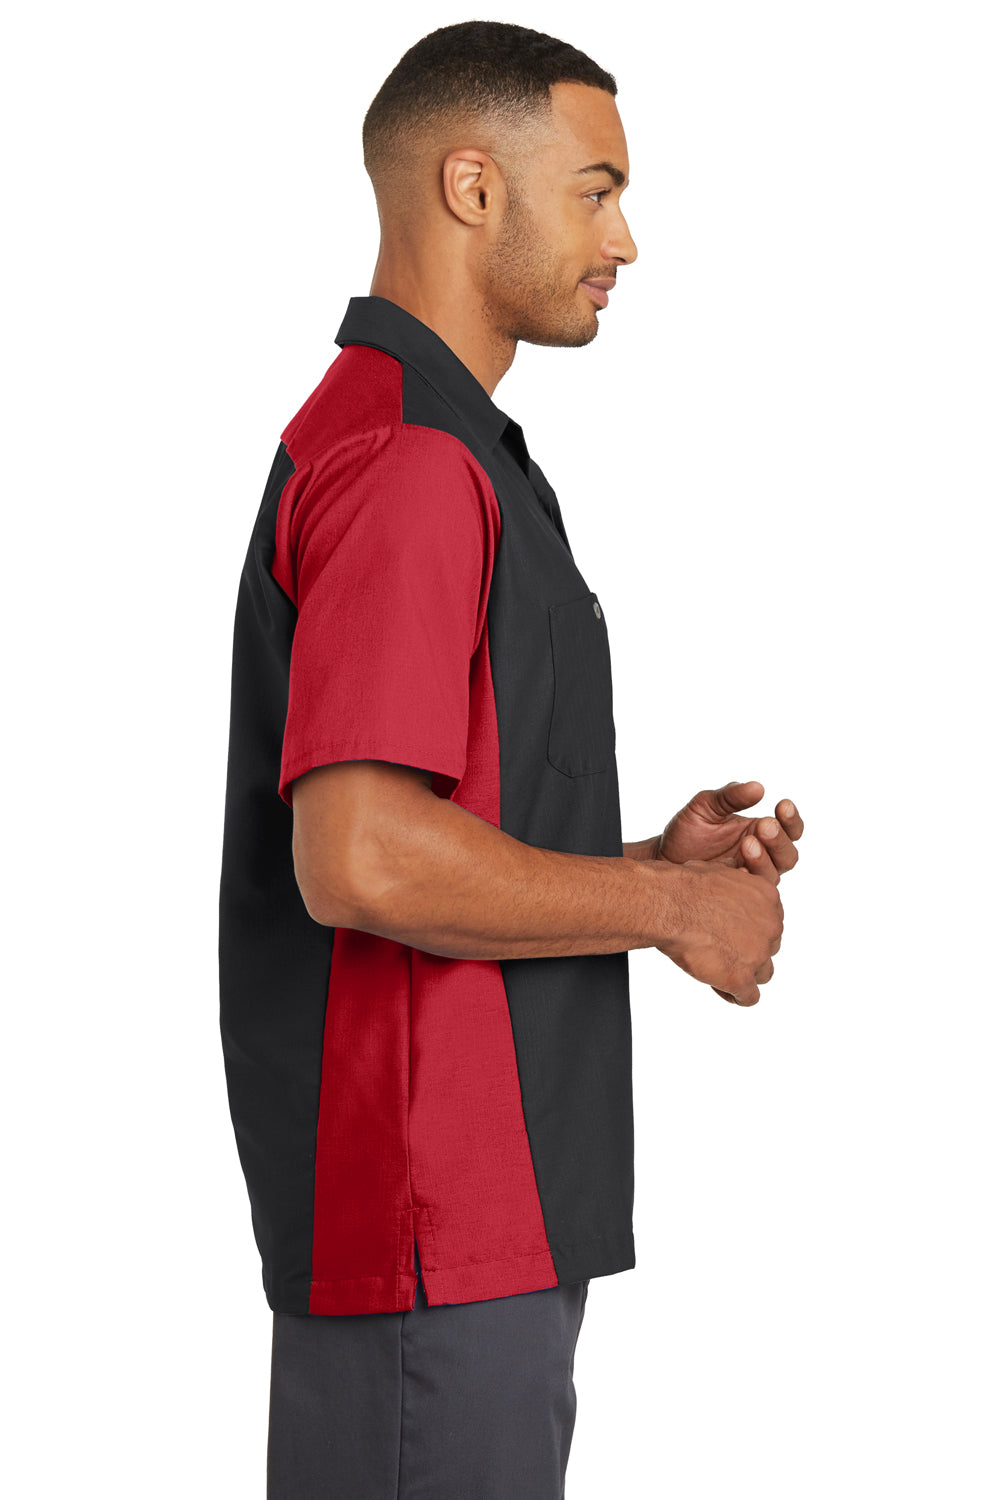 Red Kap SY20 Mens Crew Moisture Wicking Short Sleeve Button Down Shirt w/ Double Pockets Black/Red Side